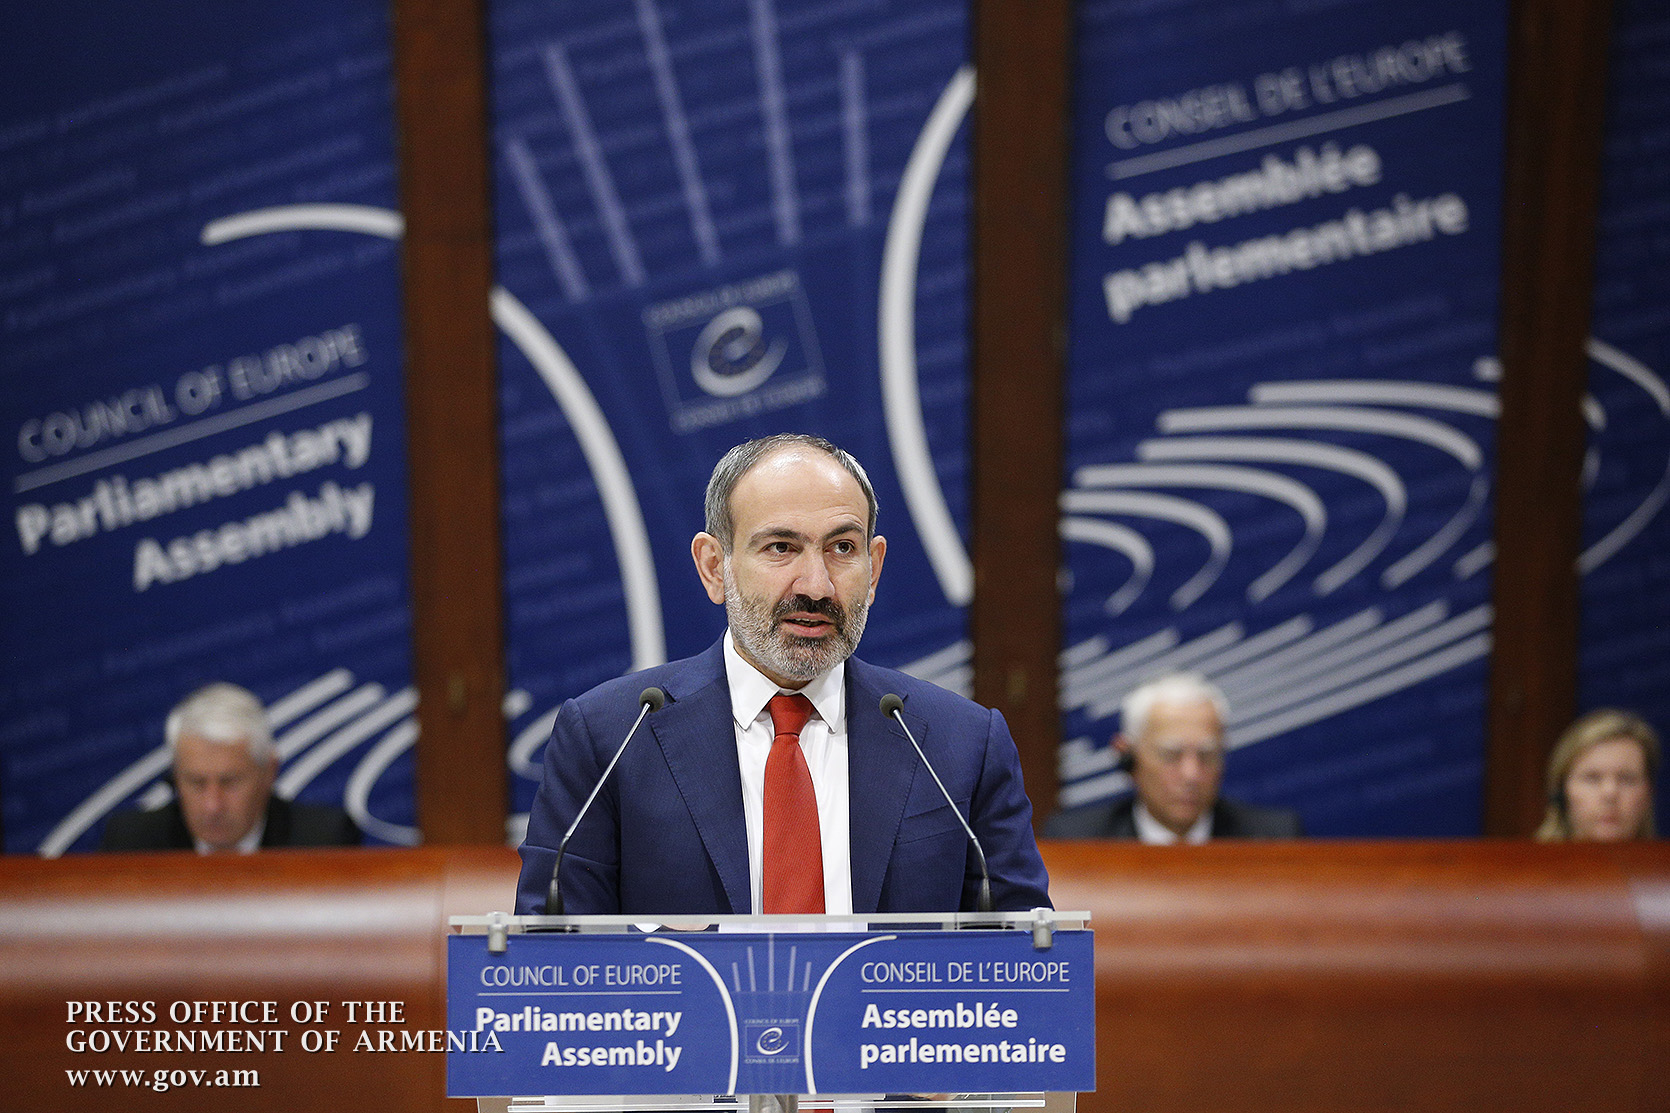 Address by Nikol Pashinyan in PACE